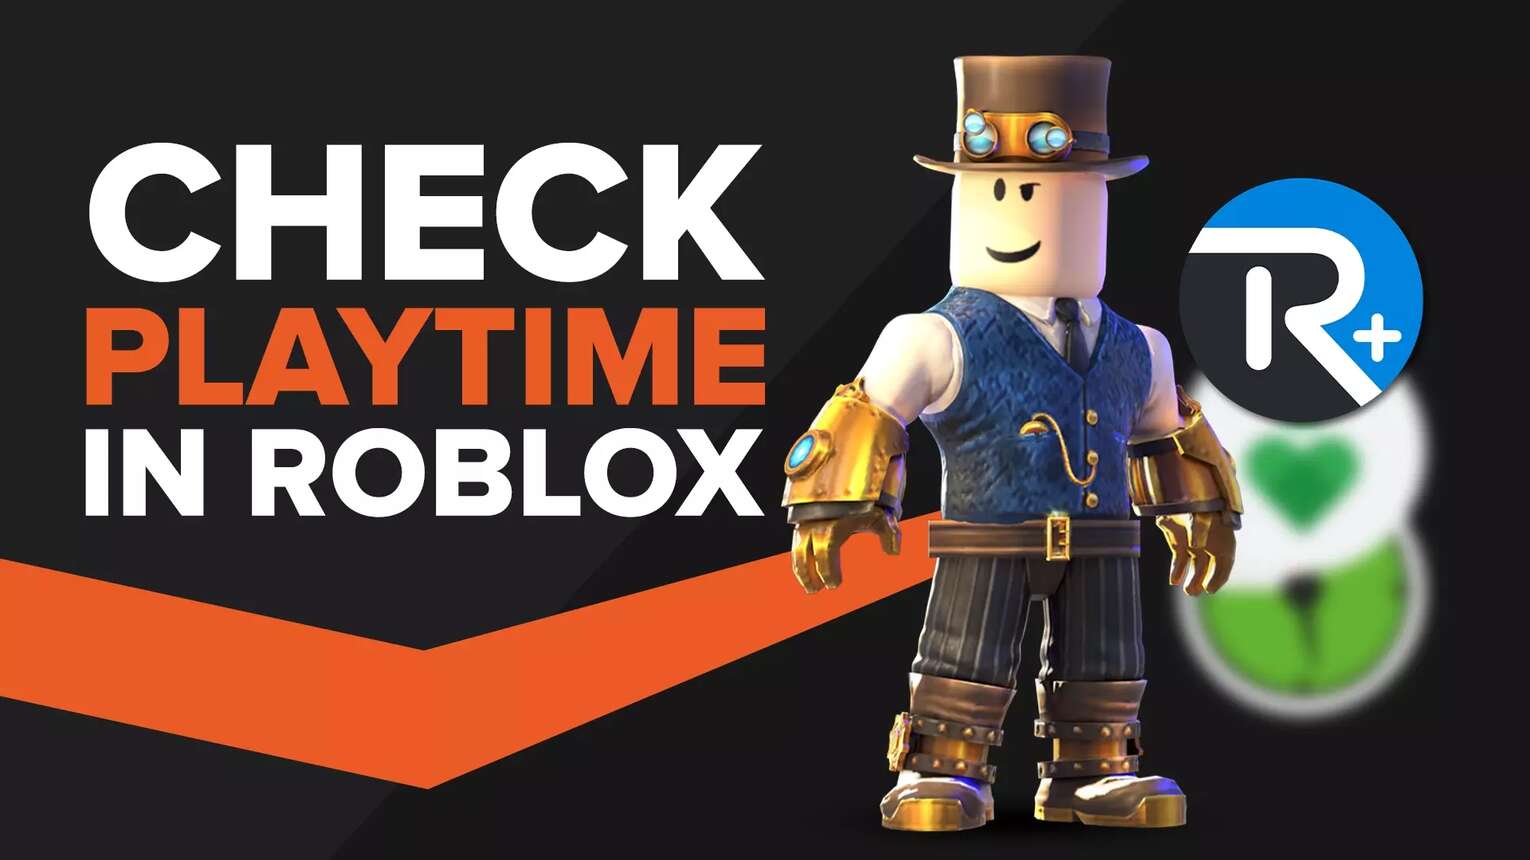 How to Check Playtime in Roblox (3 Working Methods)